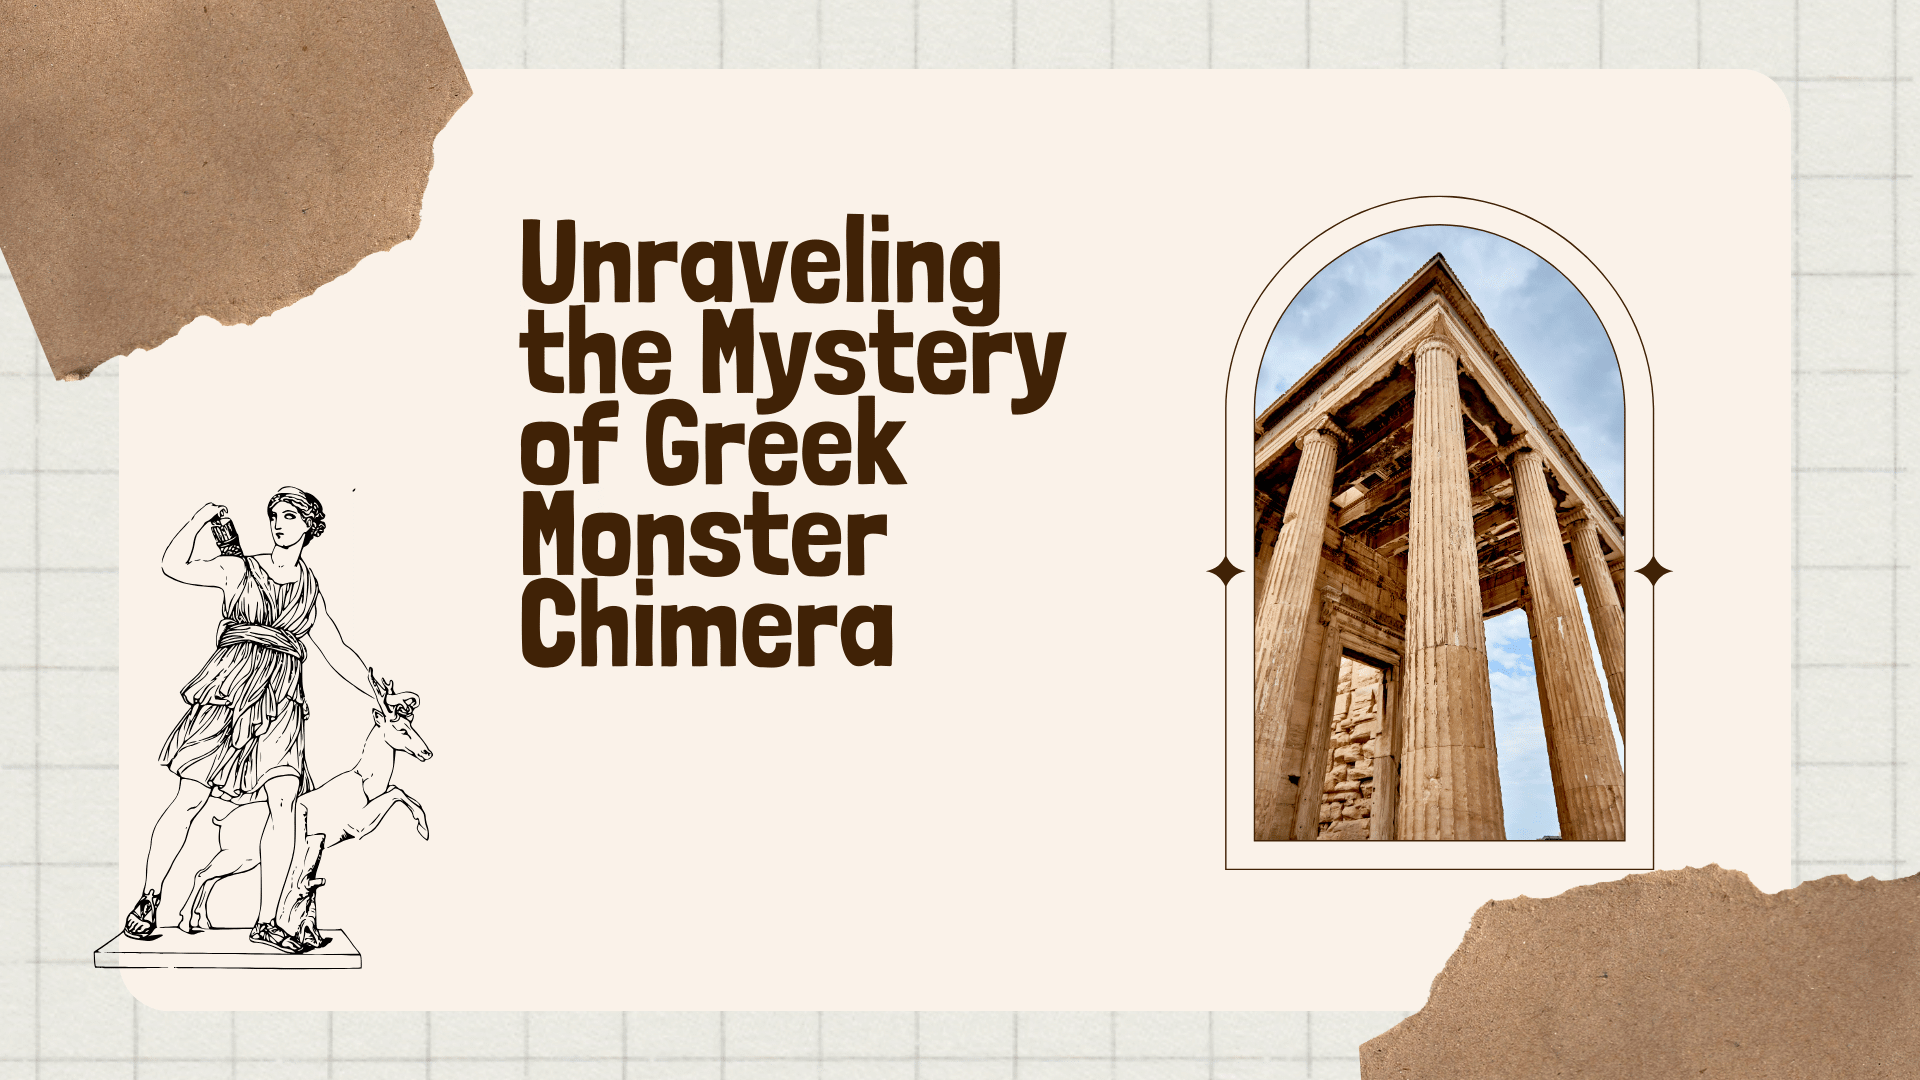 Unraveling the Mystery of Greek Monster Chimera